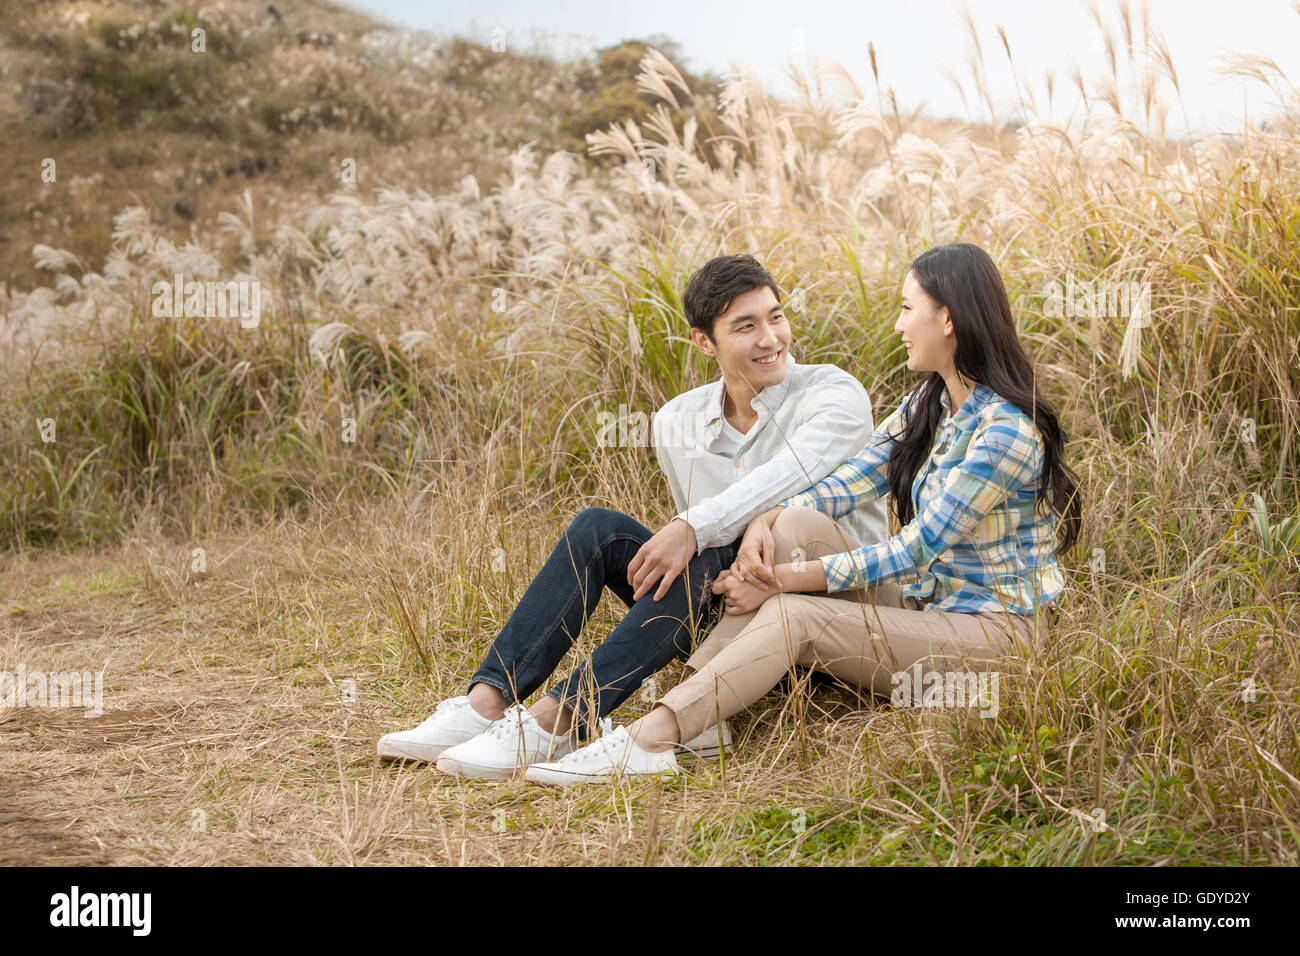 Smiling young couple sitting side by side face to face in silver grass field Stock Photo